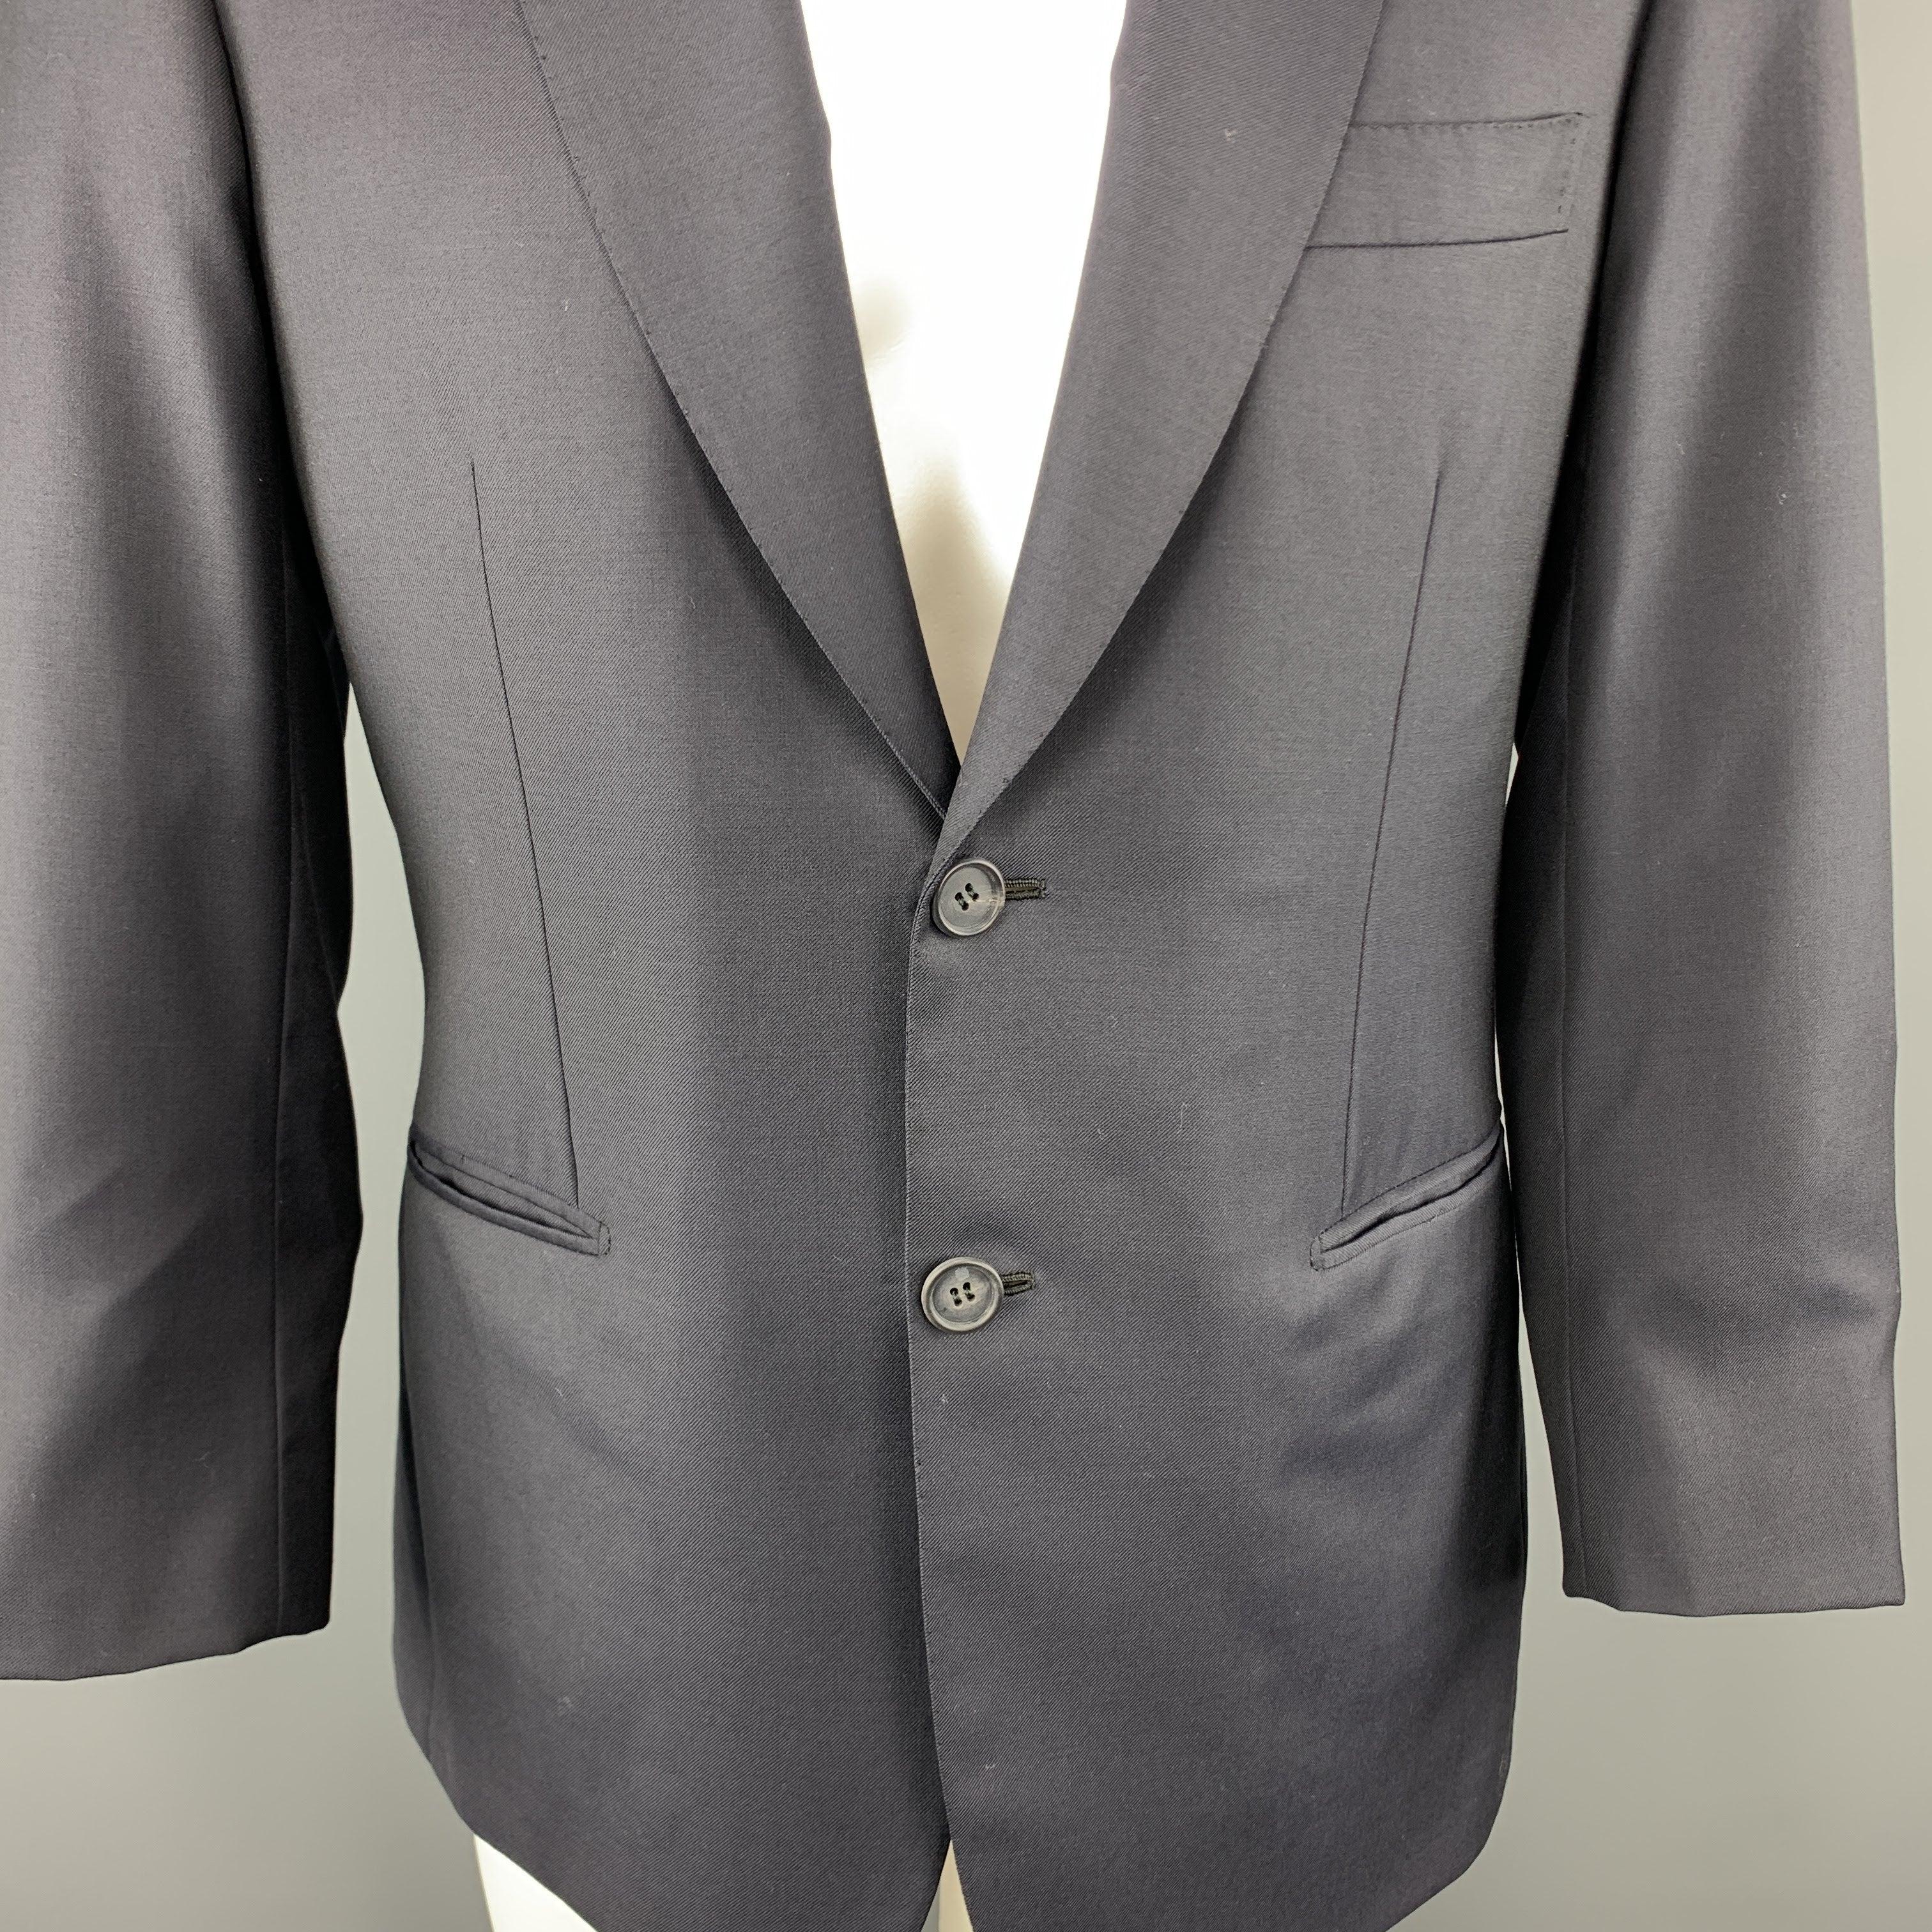 BRIONI 40 Short Navy Solid Wool Notch Lapel  Sport Coat In Excellent Condition For Sale In San Francisco, CA